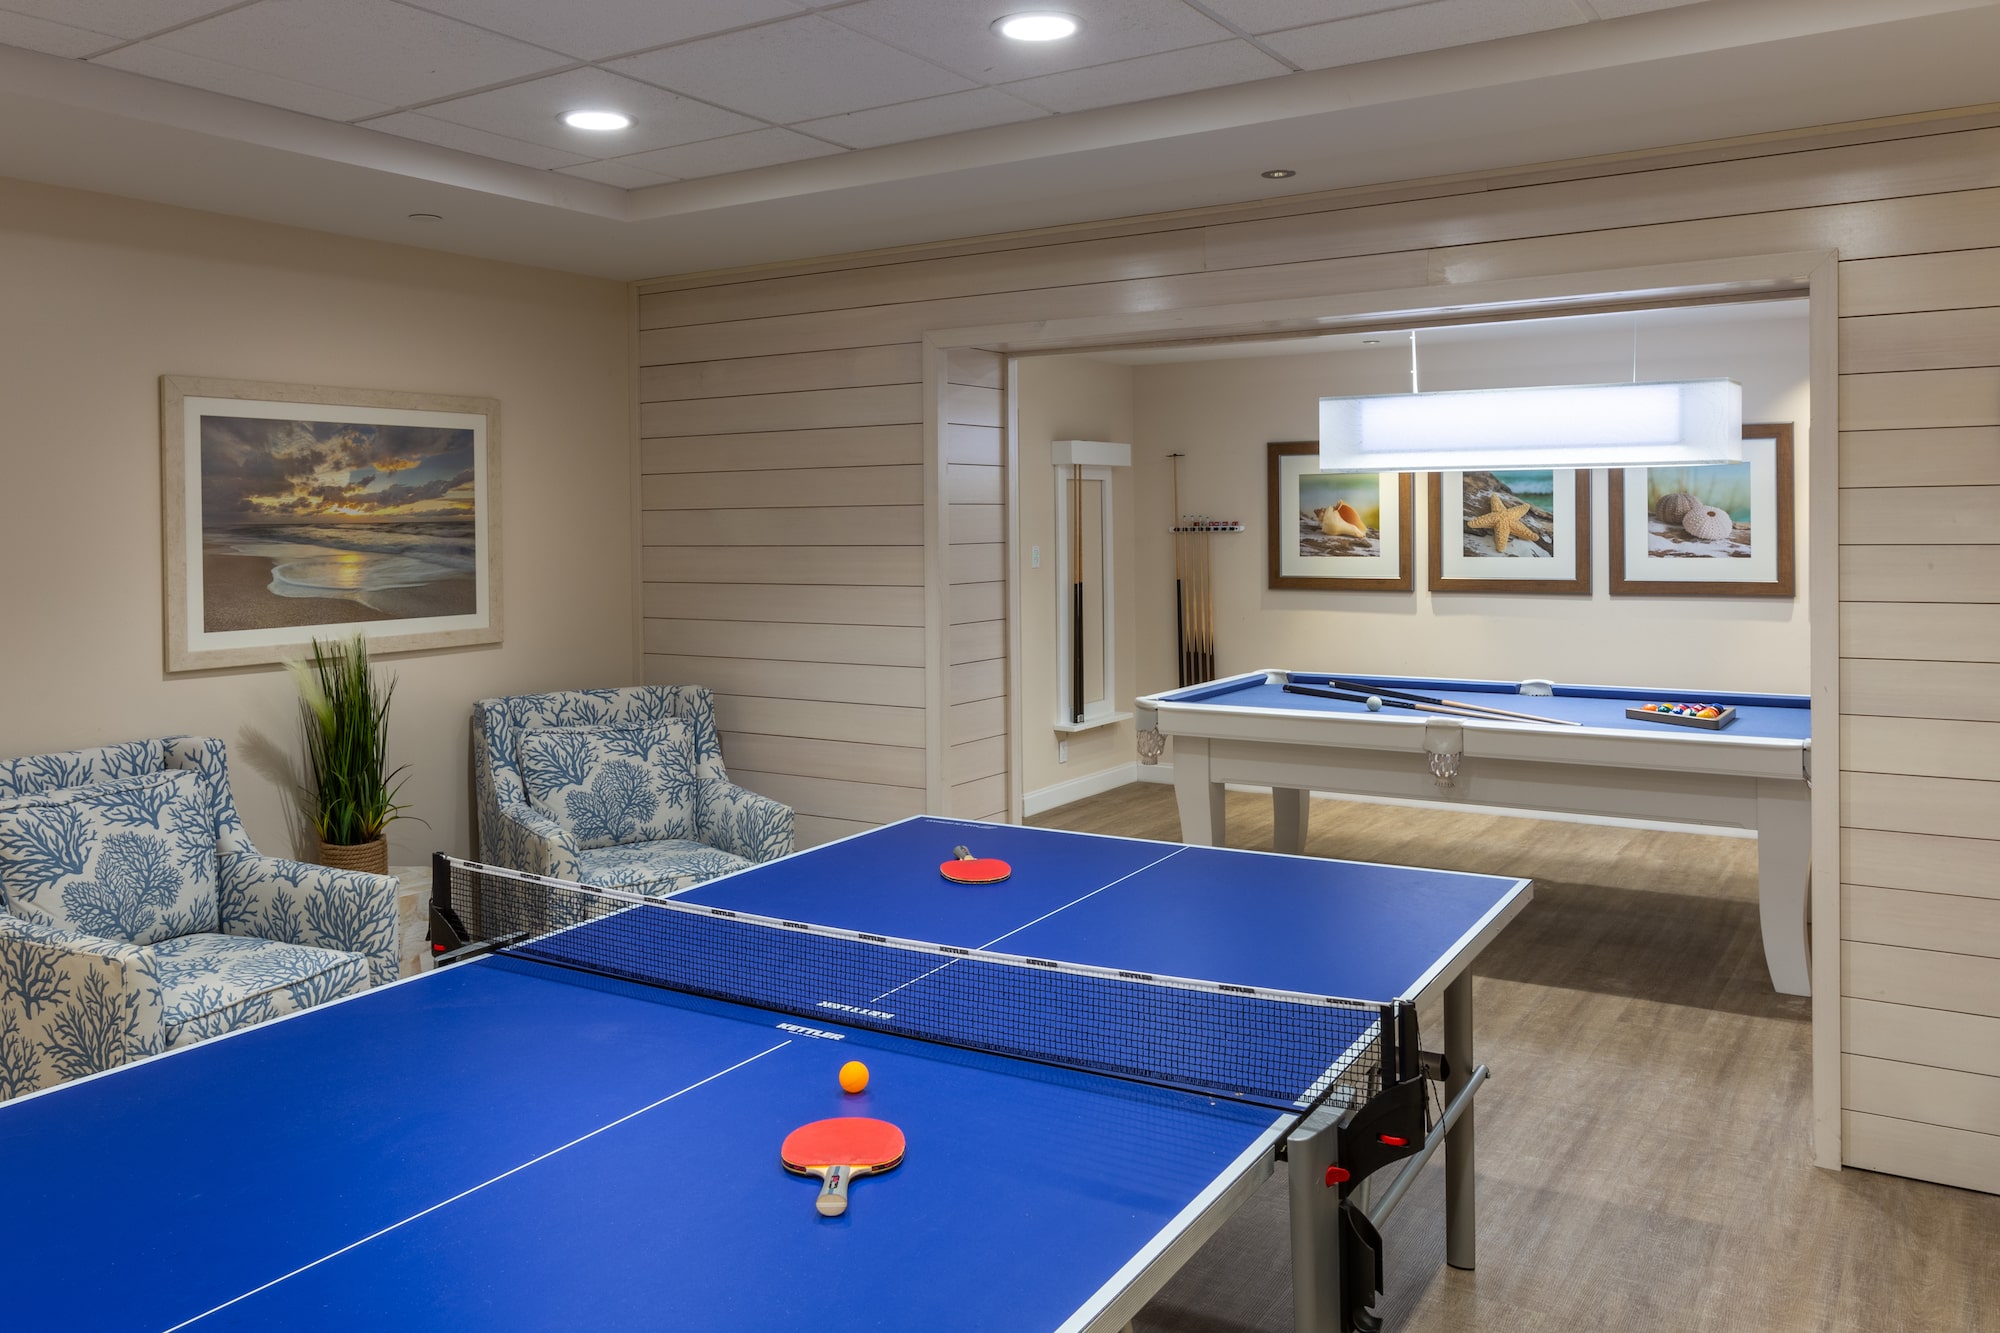 Pool and ping pong tables